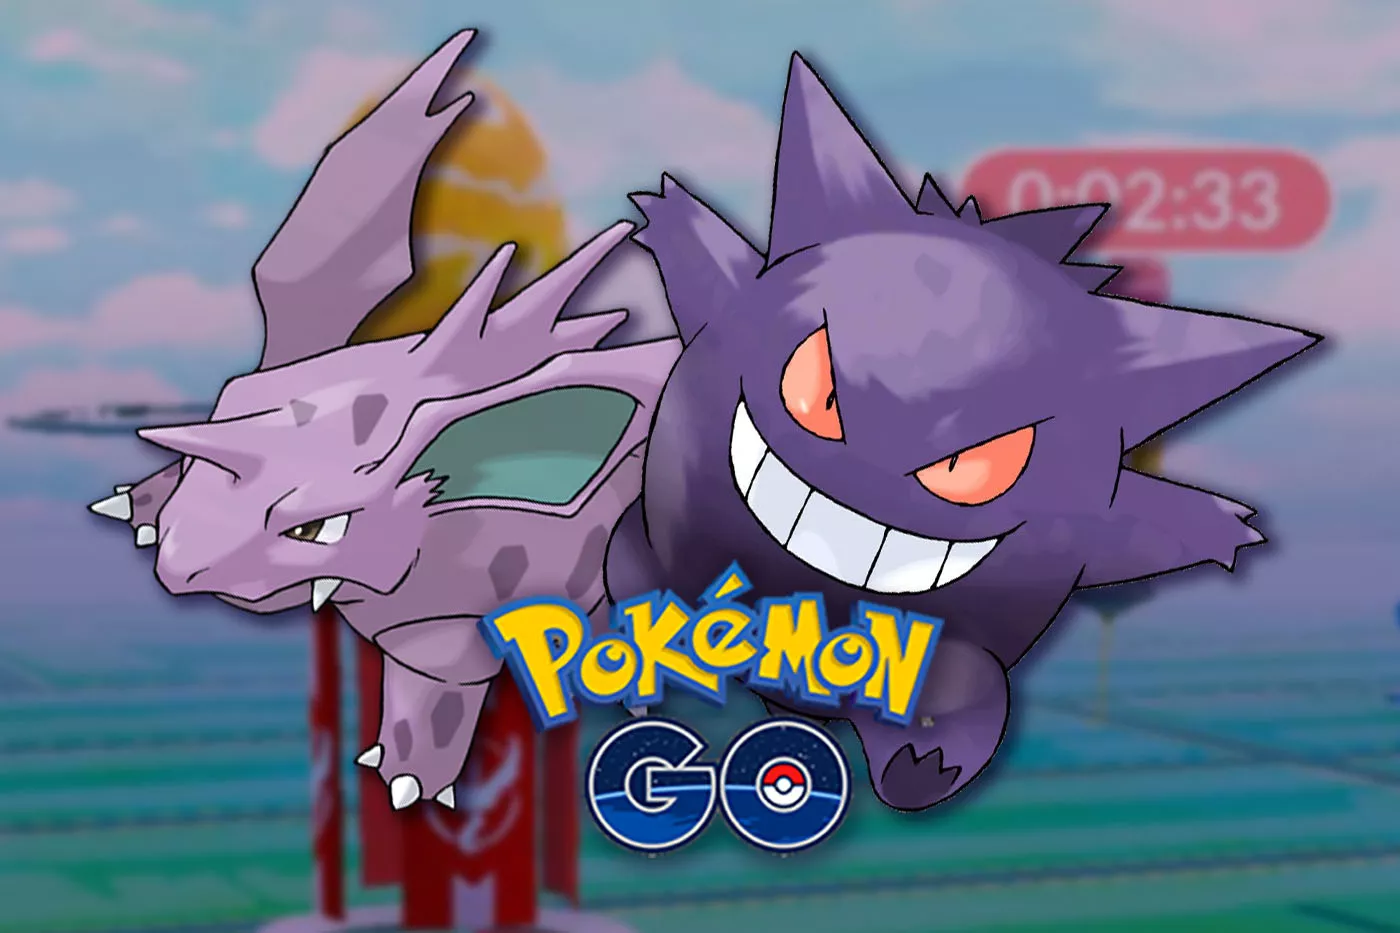 Pokémon GO - Don't forget, Trainers! Nidorino and Gengar wearing